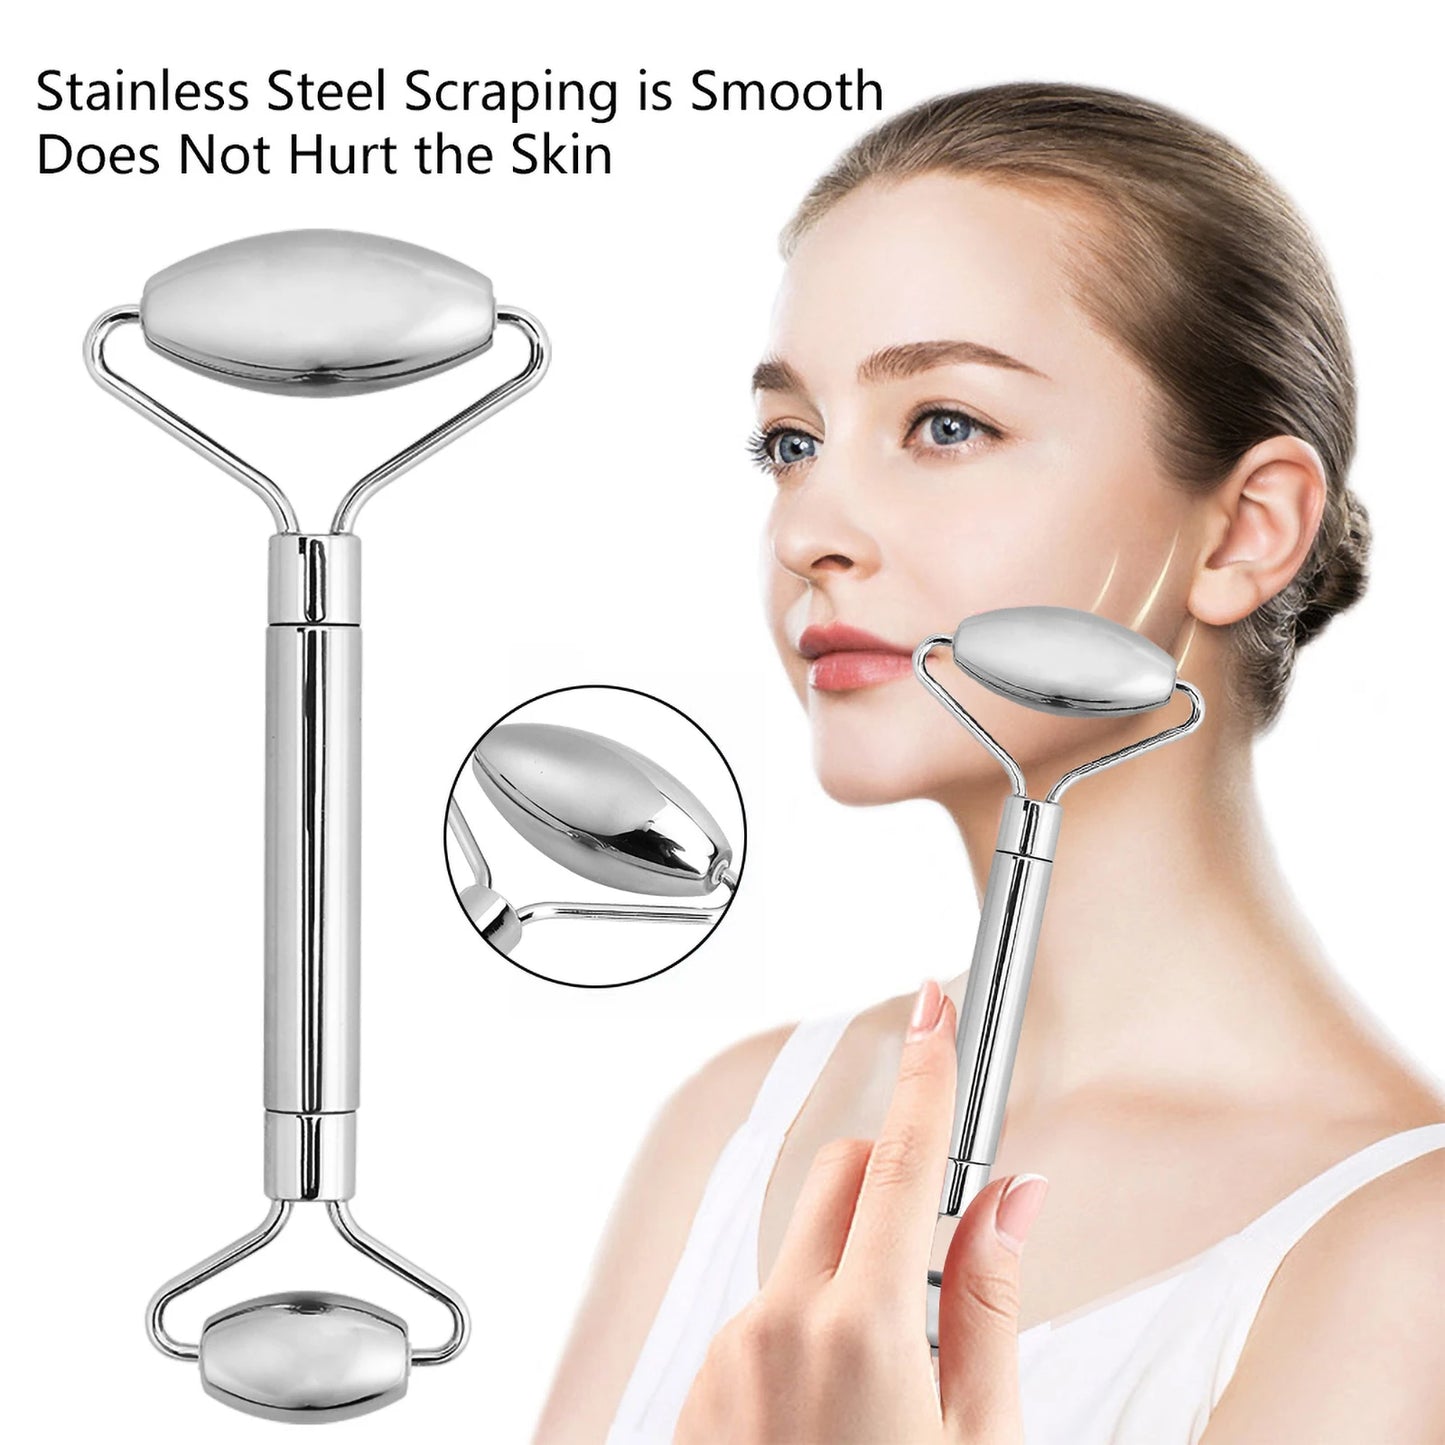 Stainless Steel Facial Roller Gua Sha Set Face Care Lifting Massage Tools Anti Wrinkle Skin Tighten Cooling Cellulite Massager